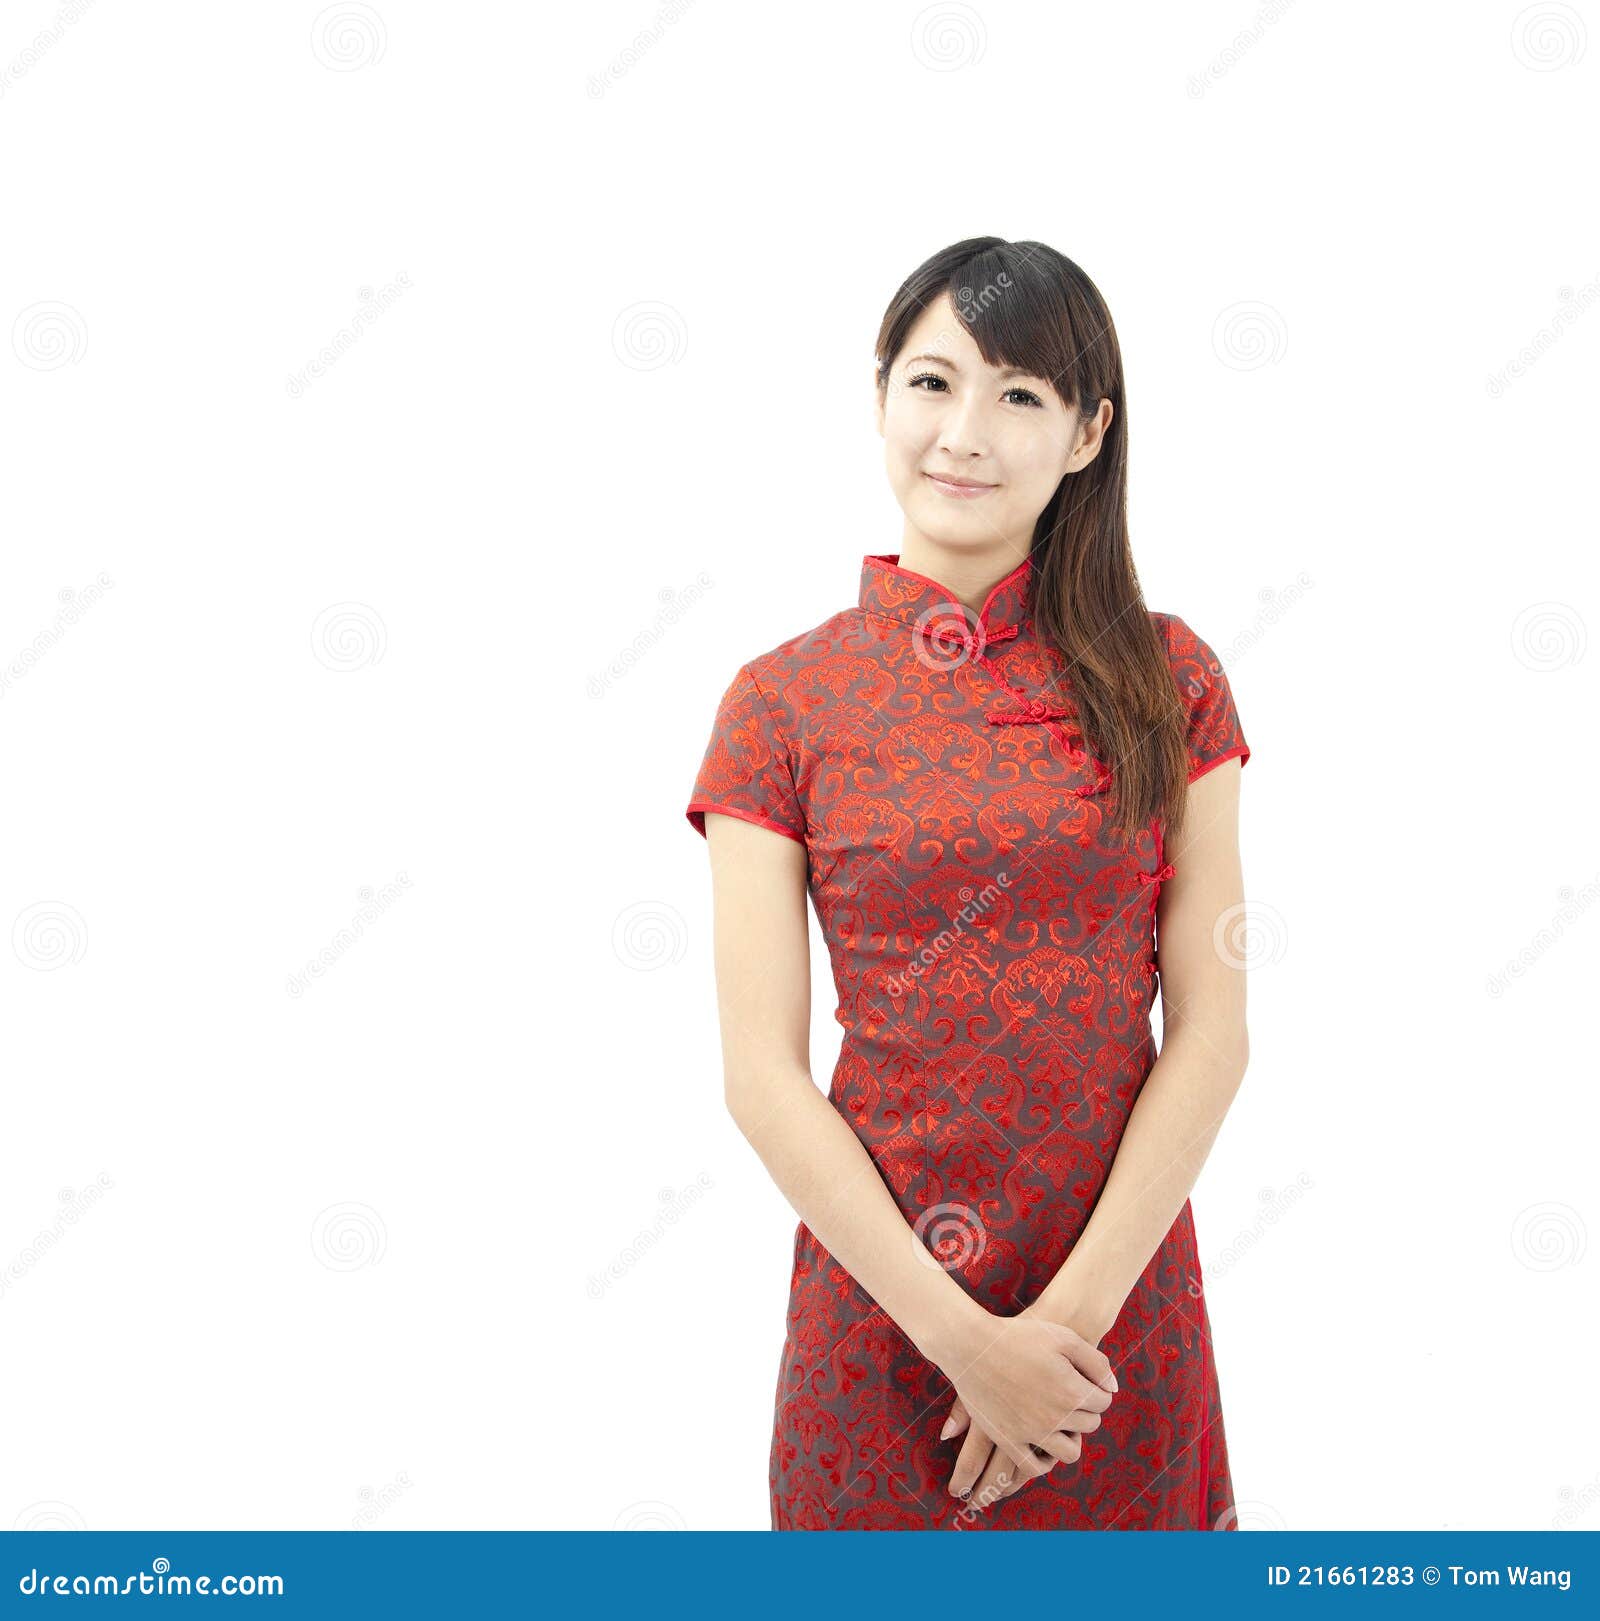 asian woman and traditional clothing cheongsam